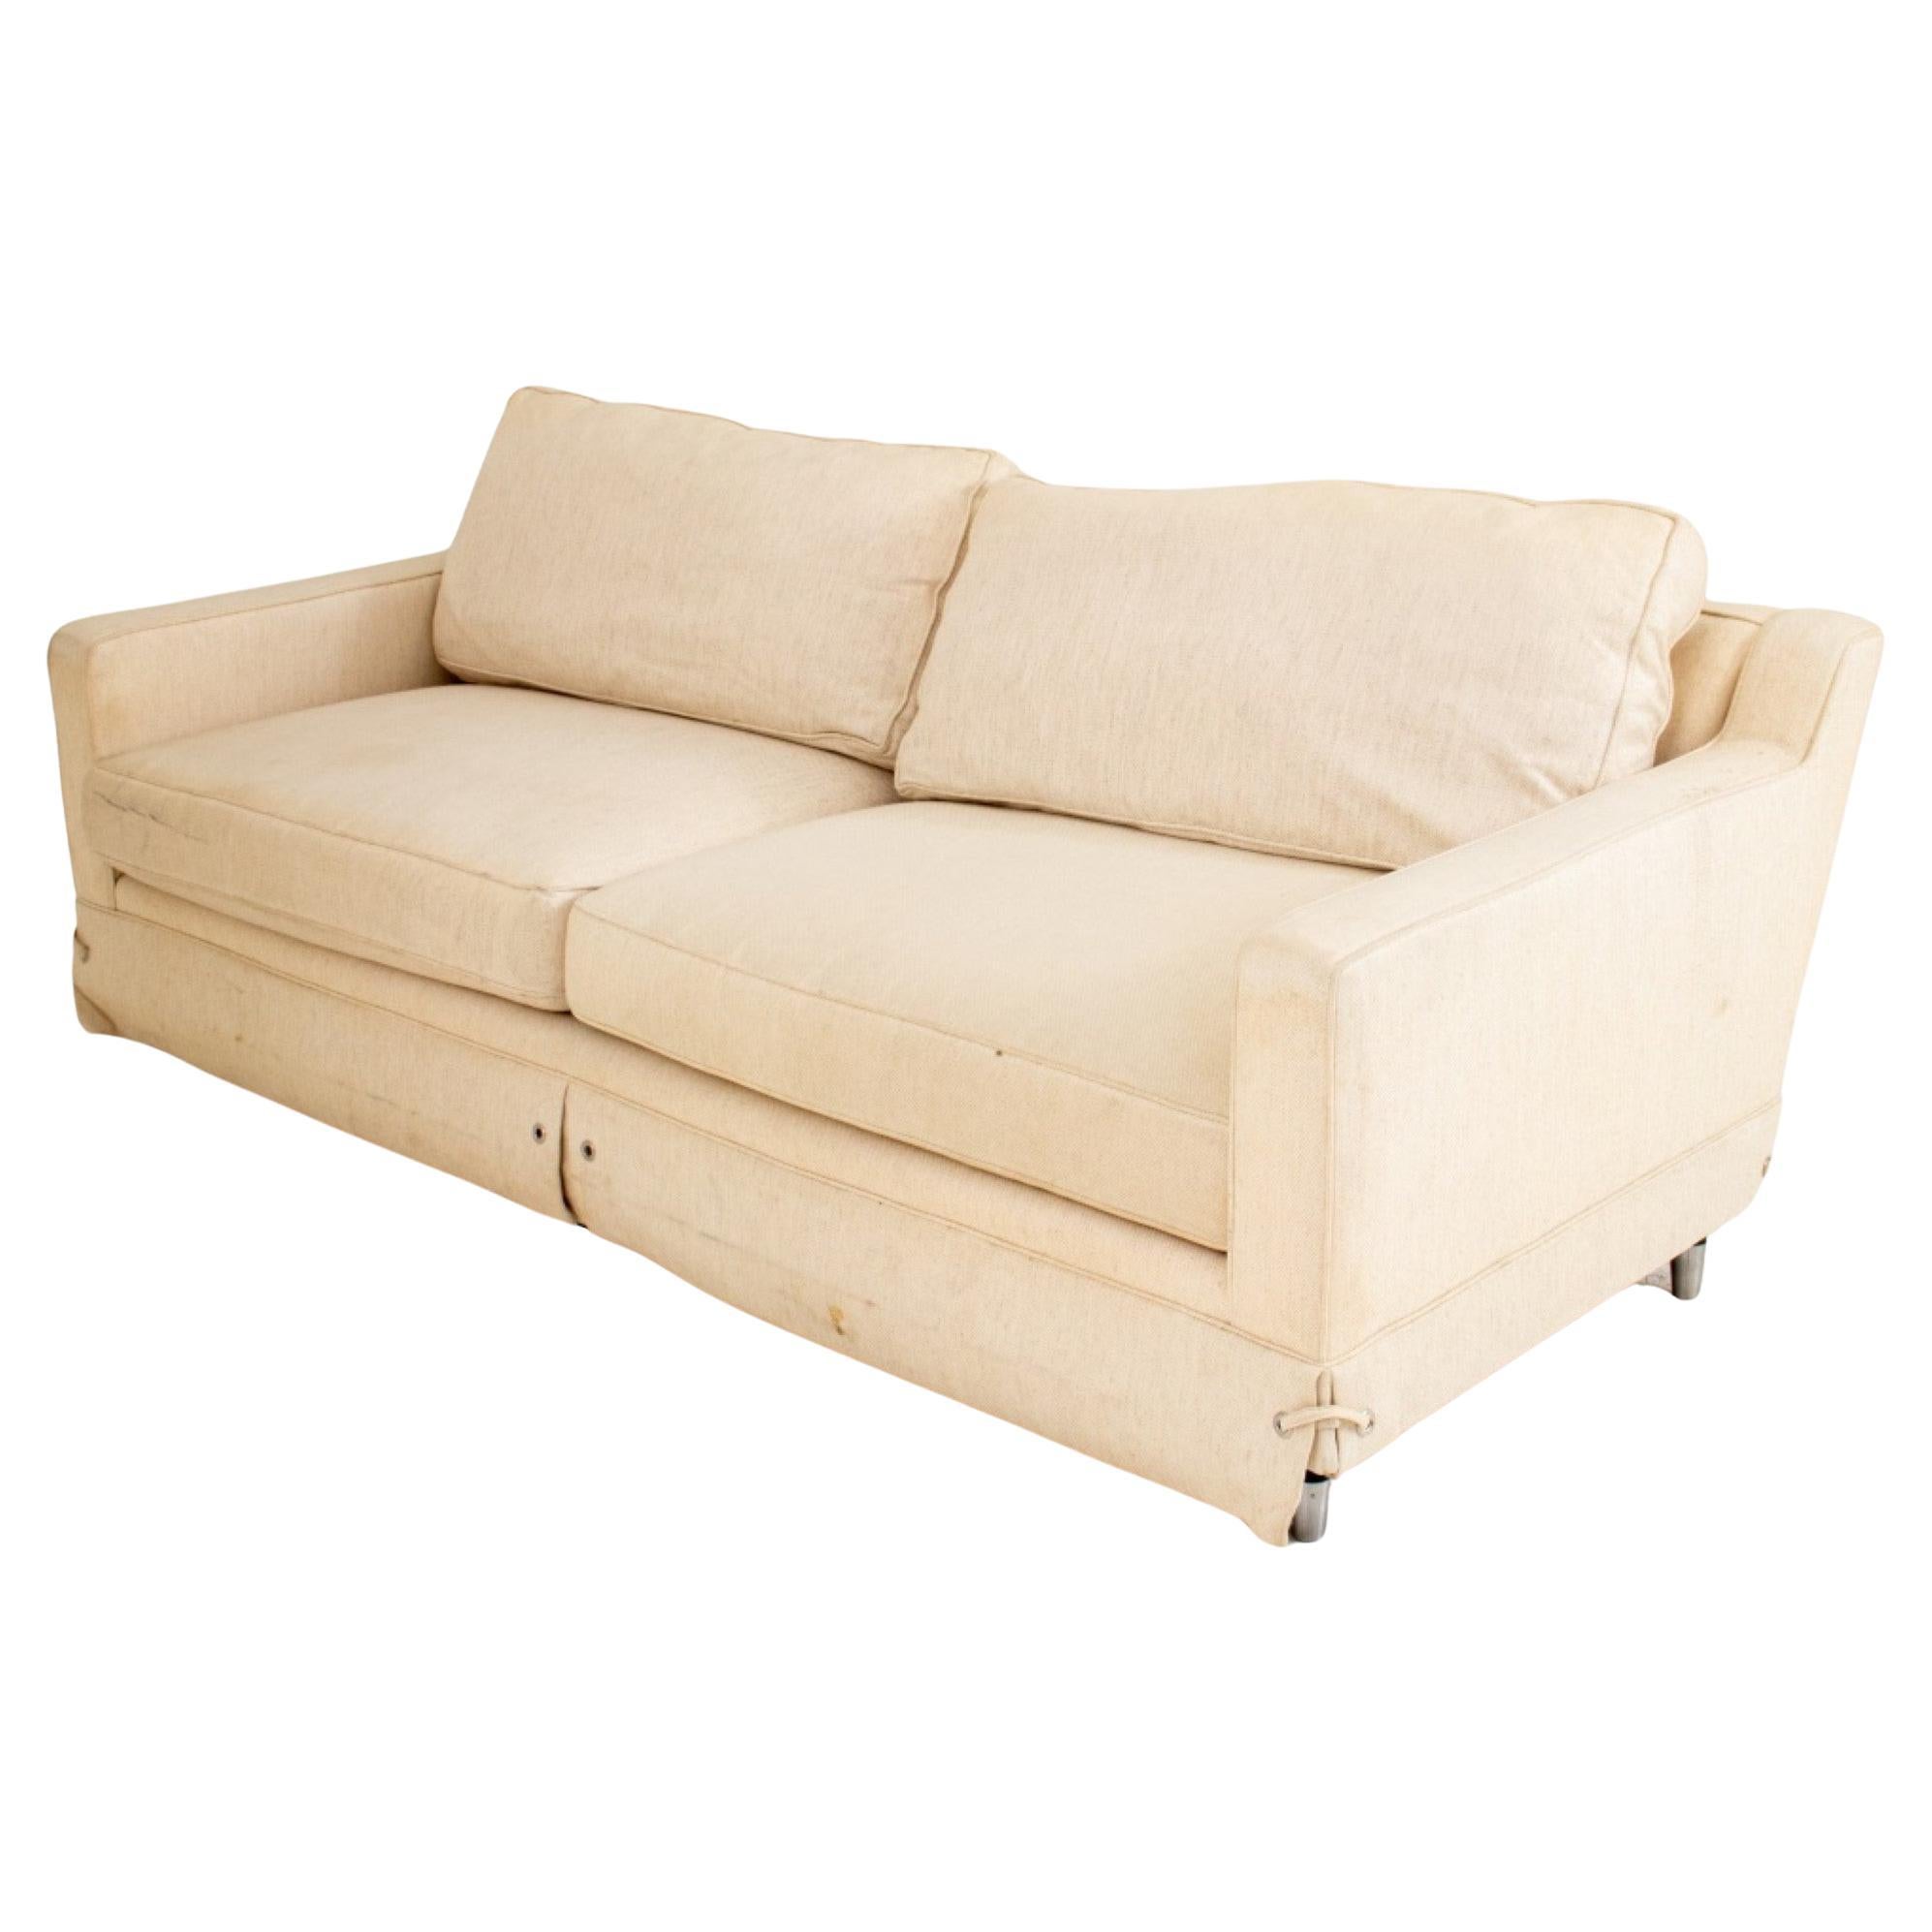 Directional PCL Modern Upholstered Sofa For Sale